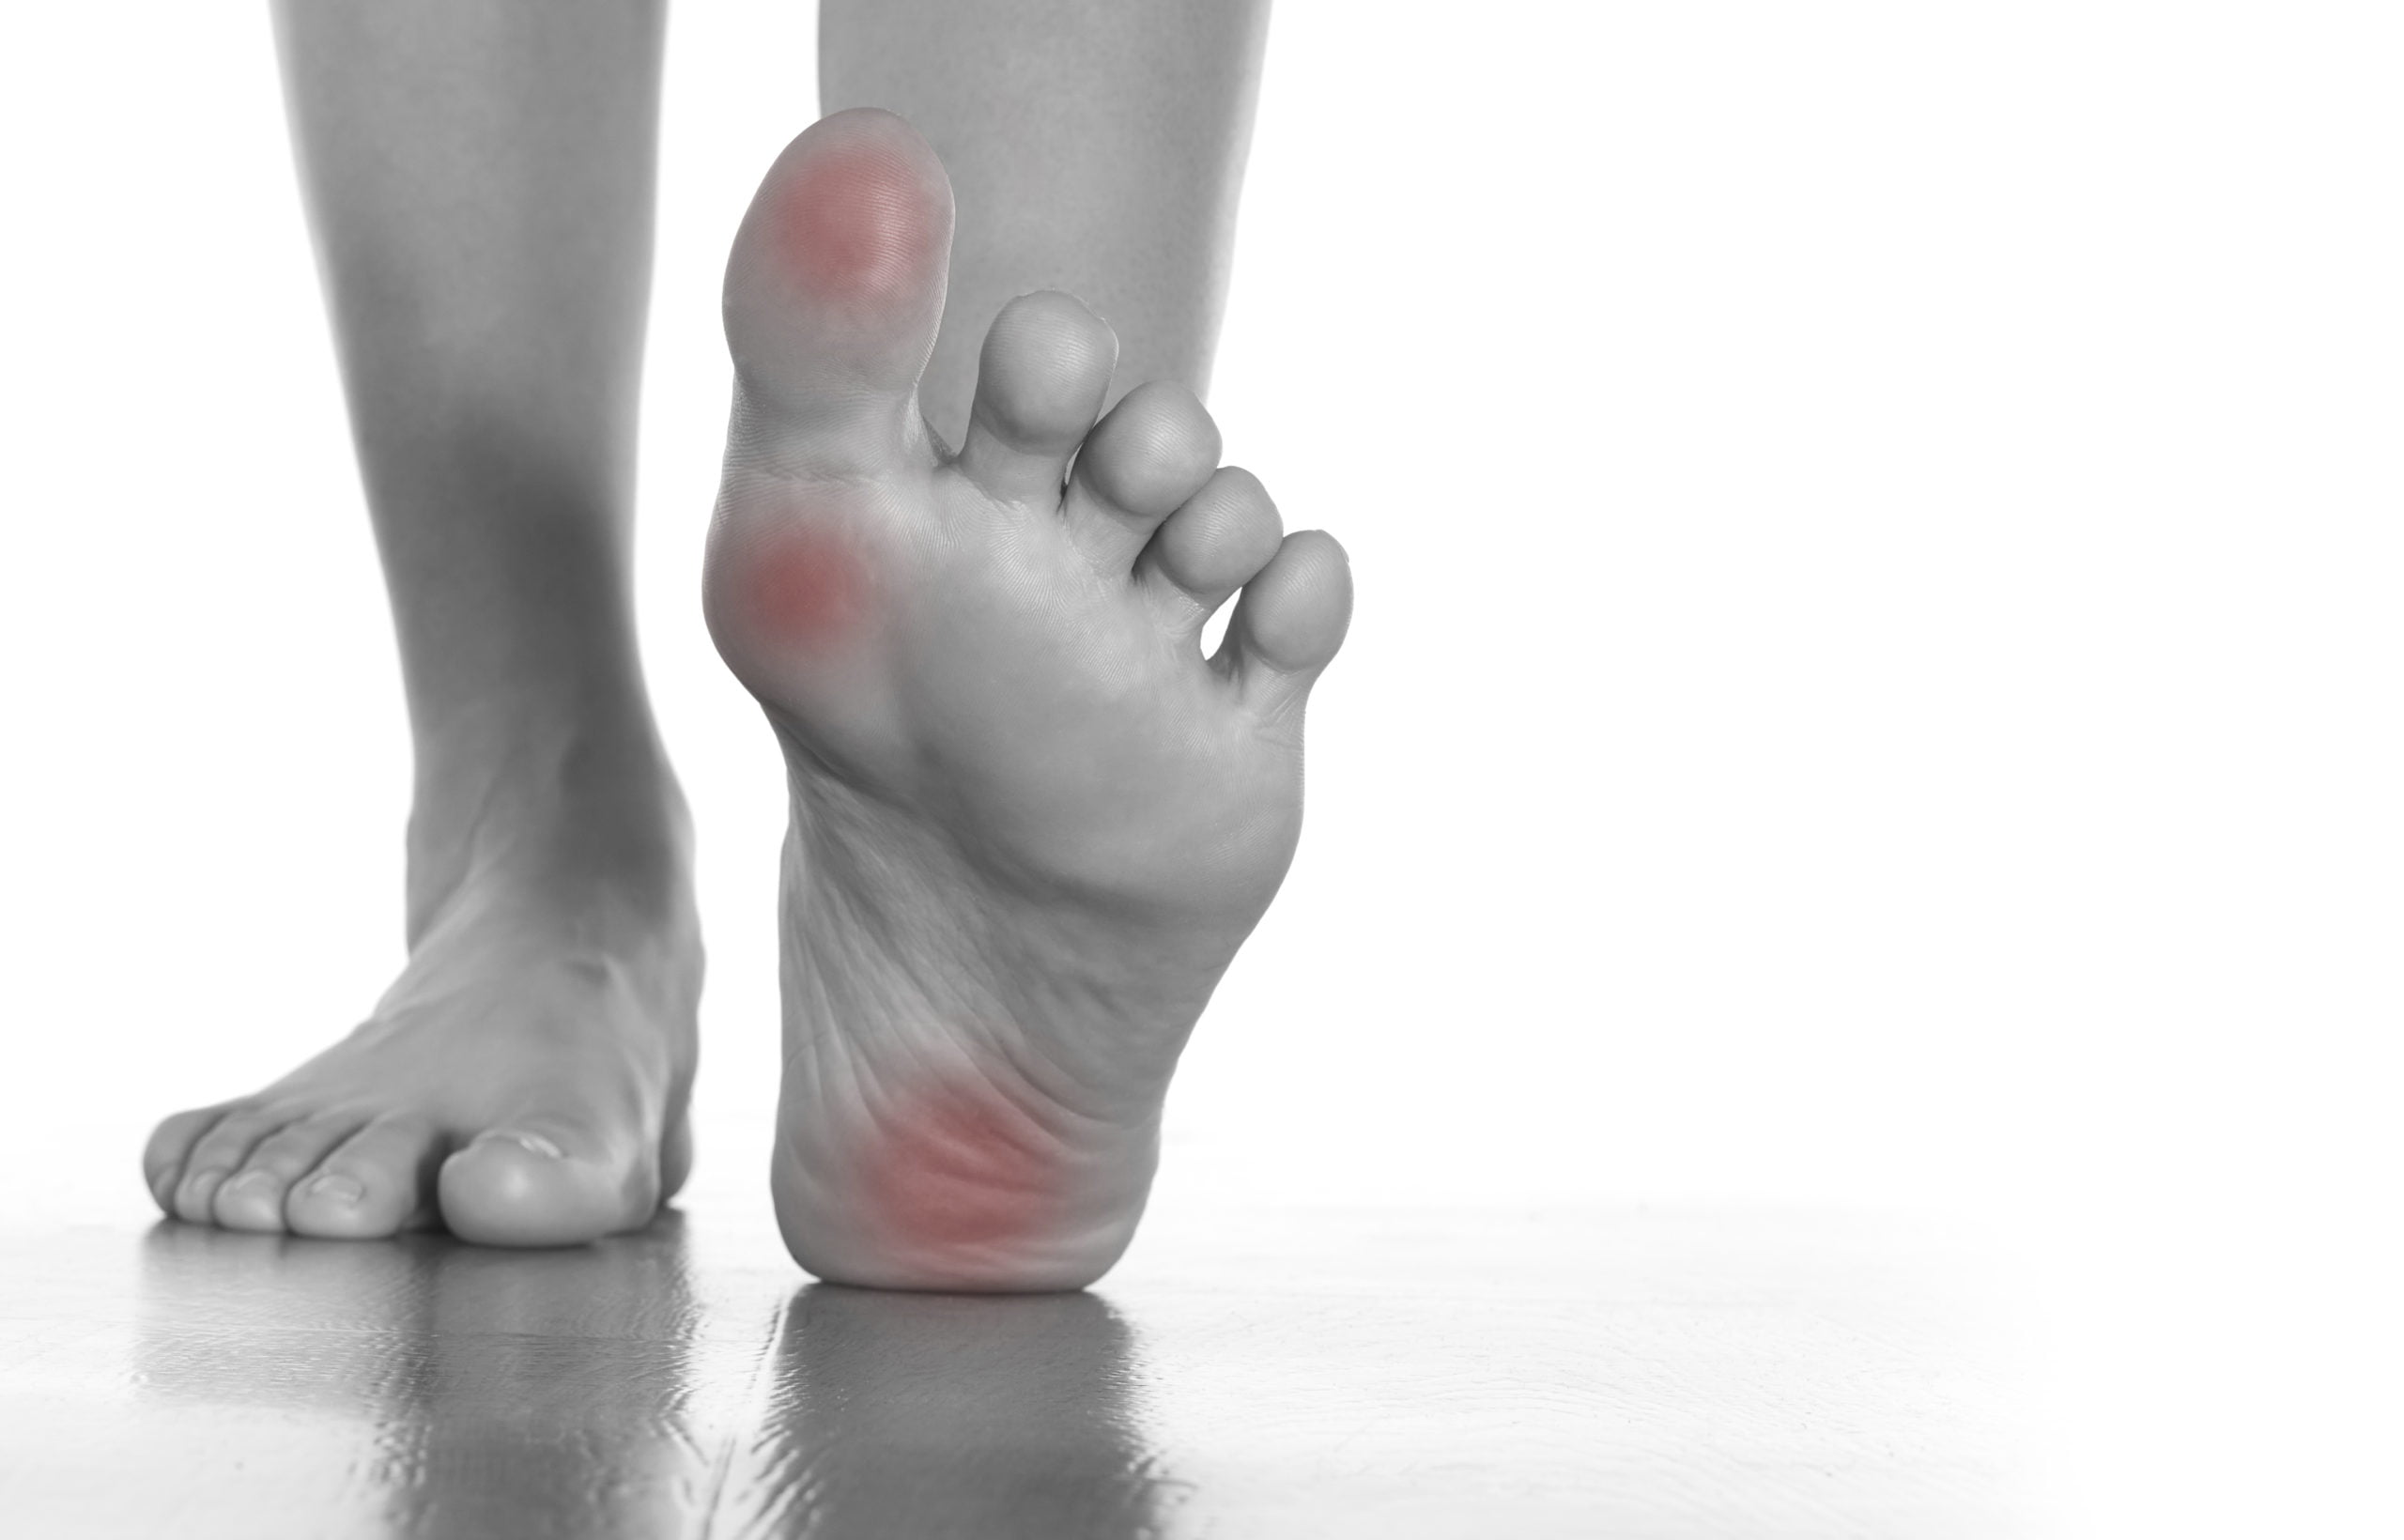 Natural cures for foot pain